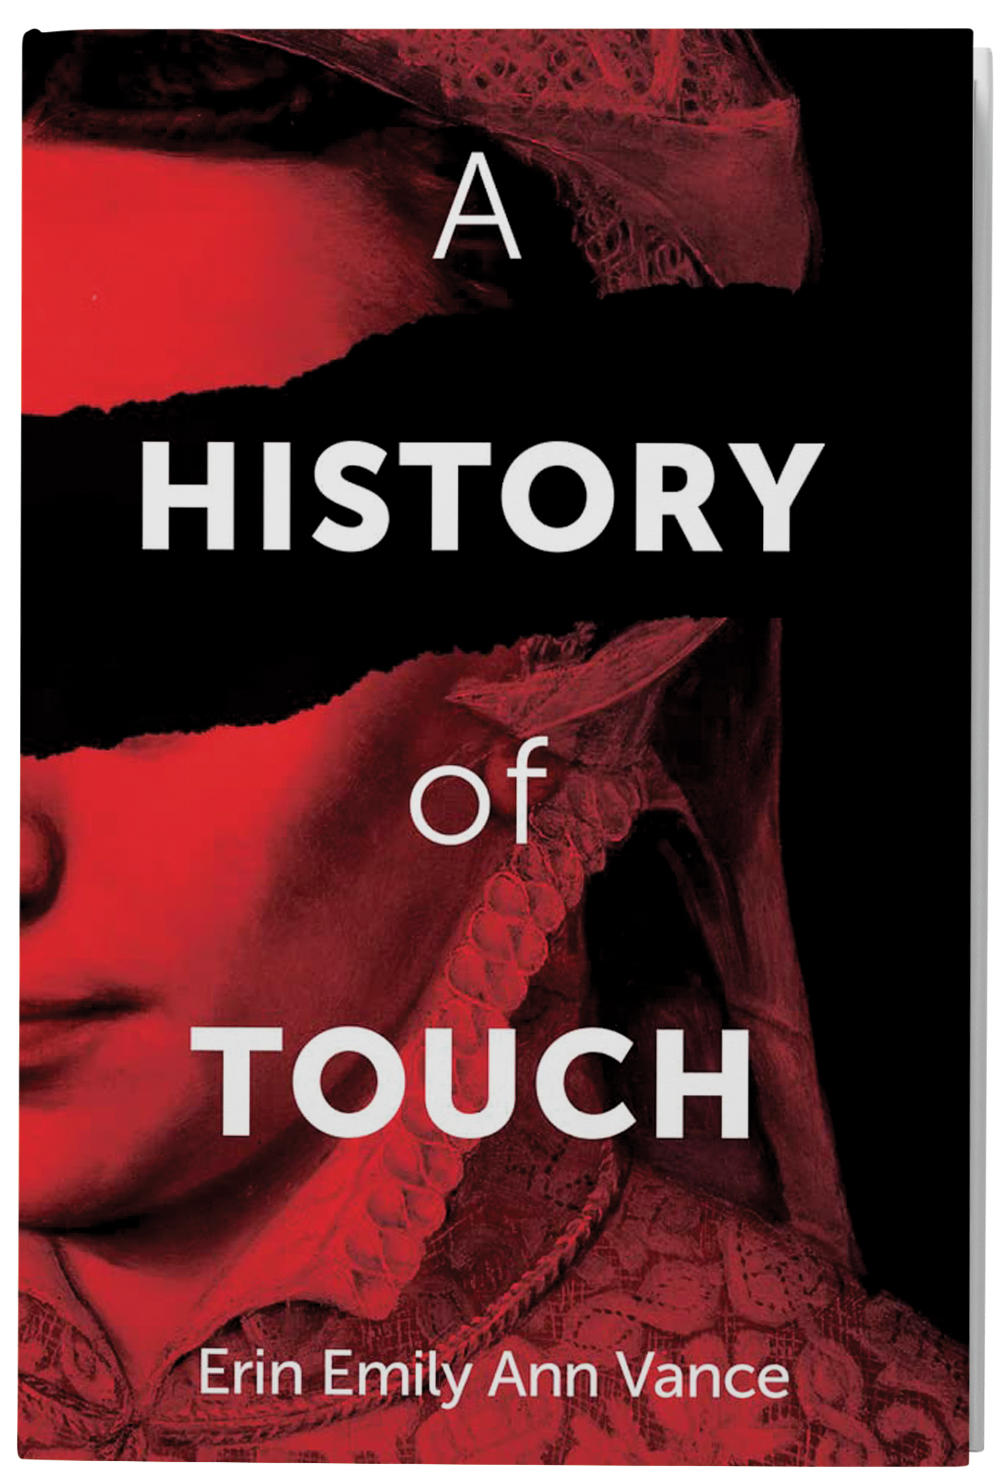 A History of Touch